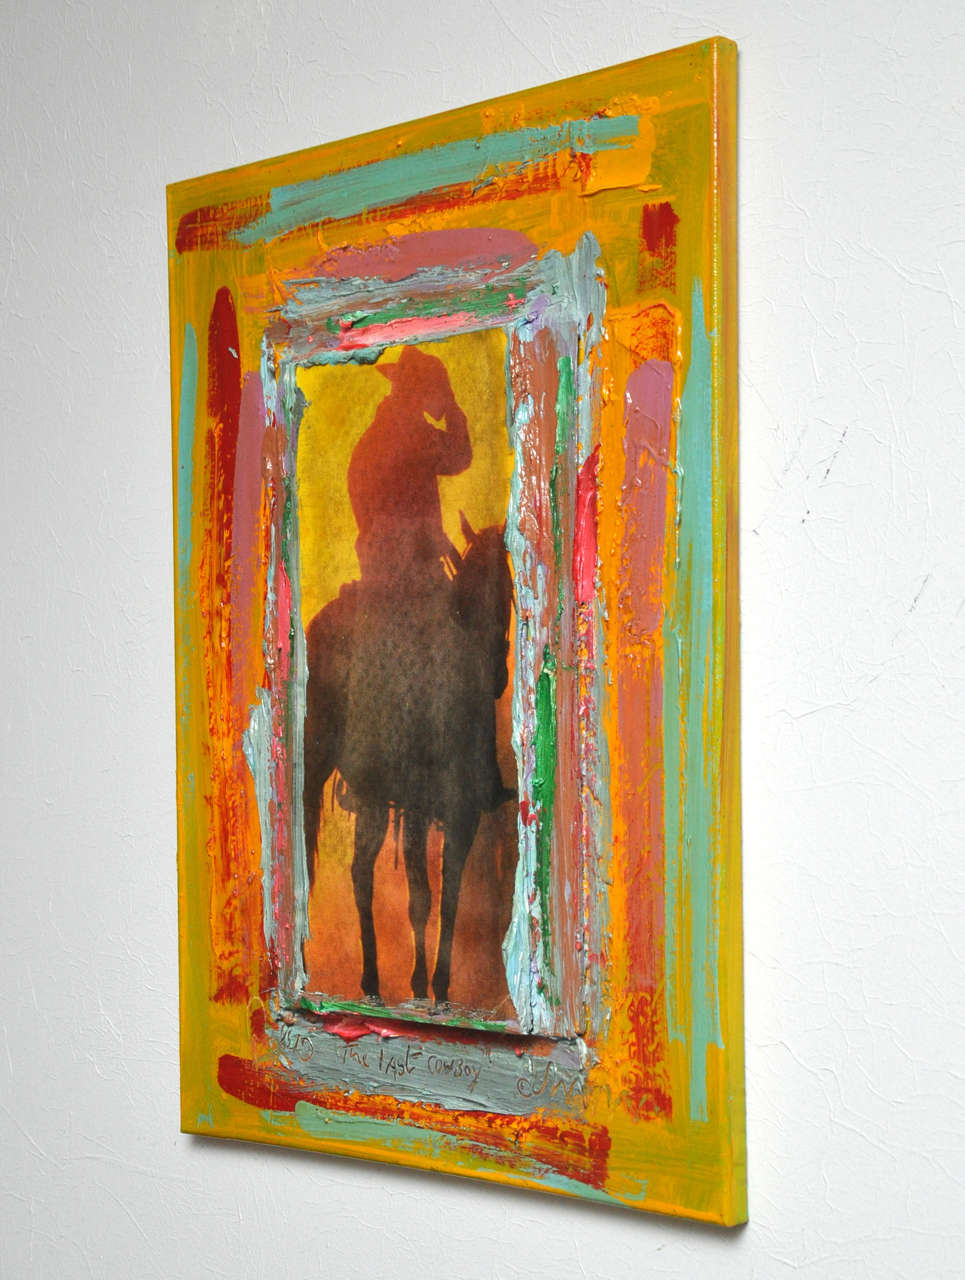 The last cowboy of palm springs painting.